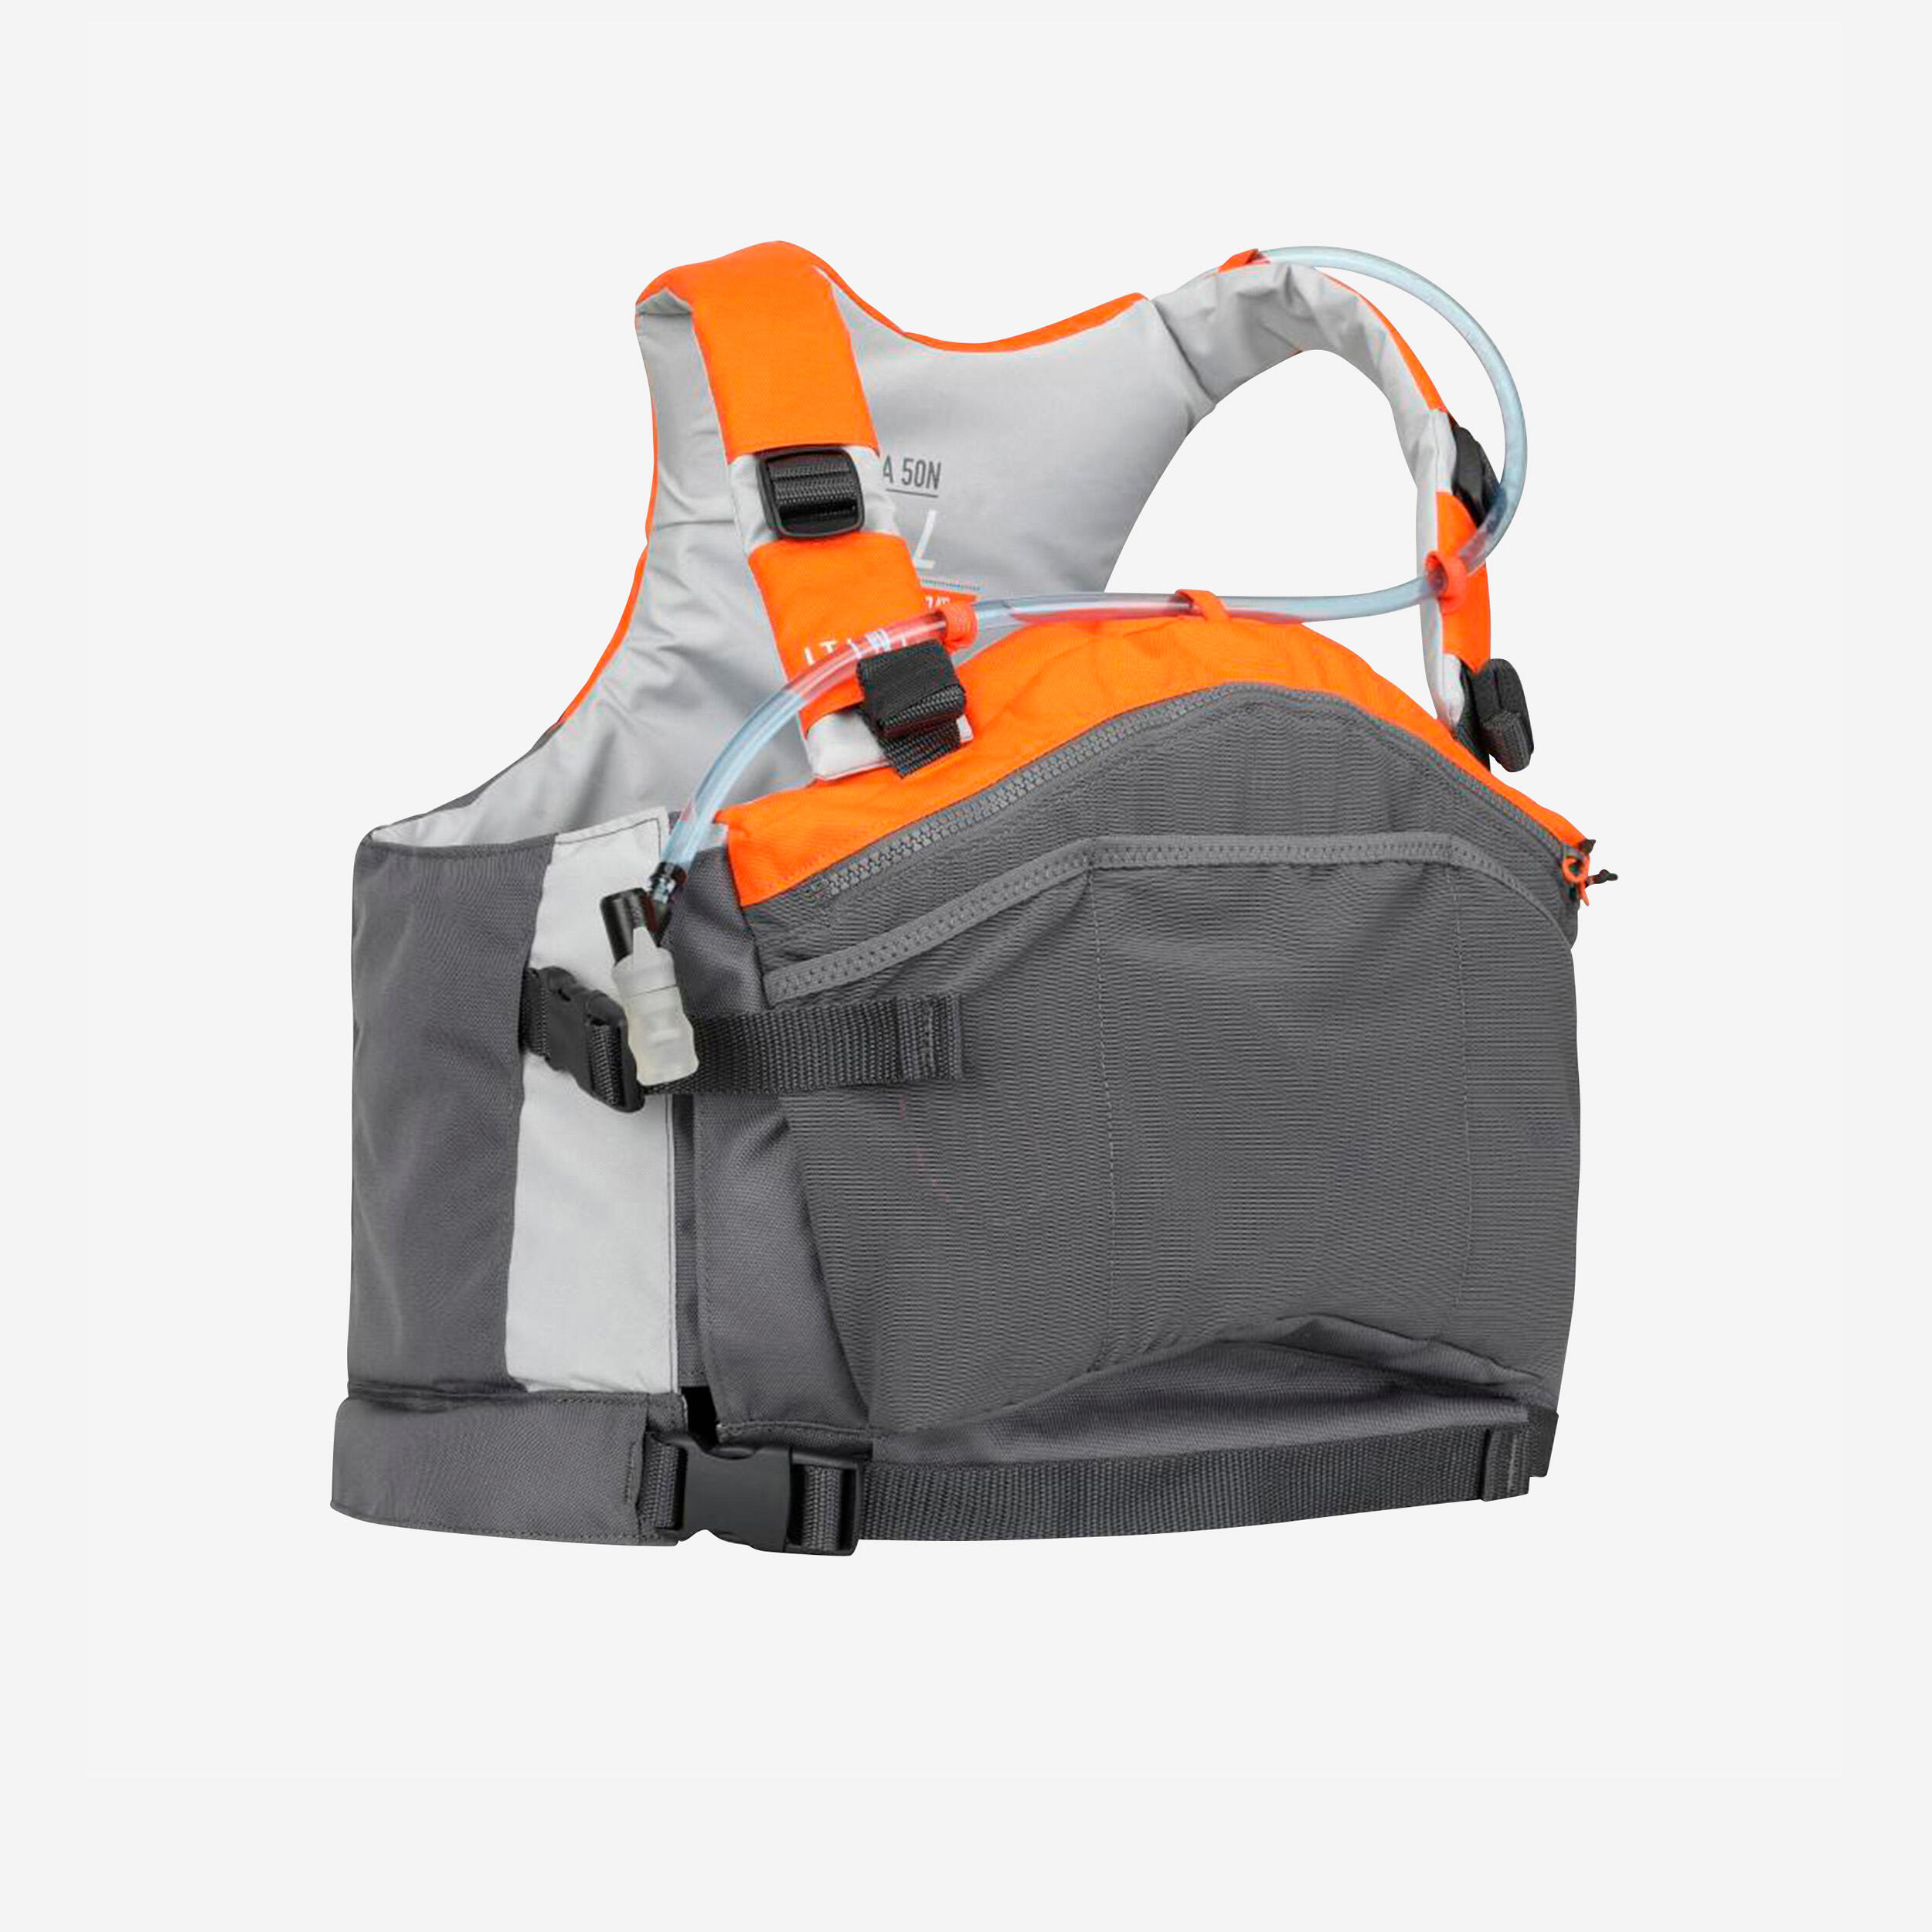 ITIWIT Canoe Kayak and SUP 50N life vest with pockets